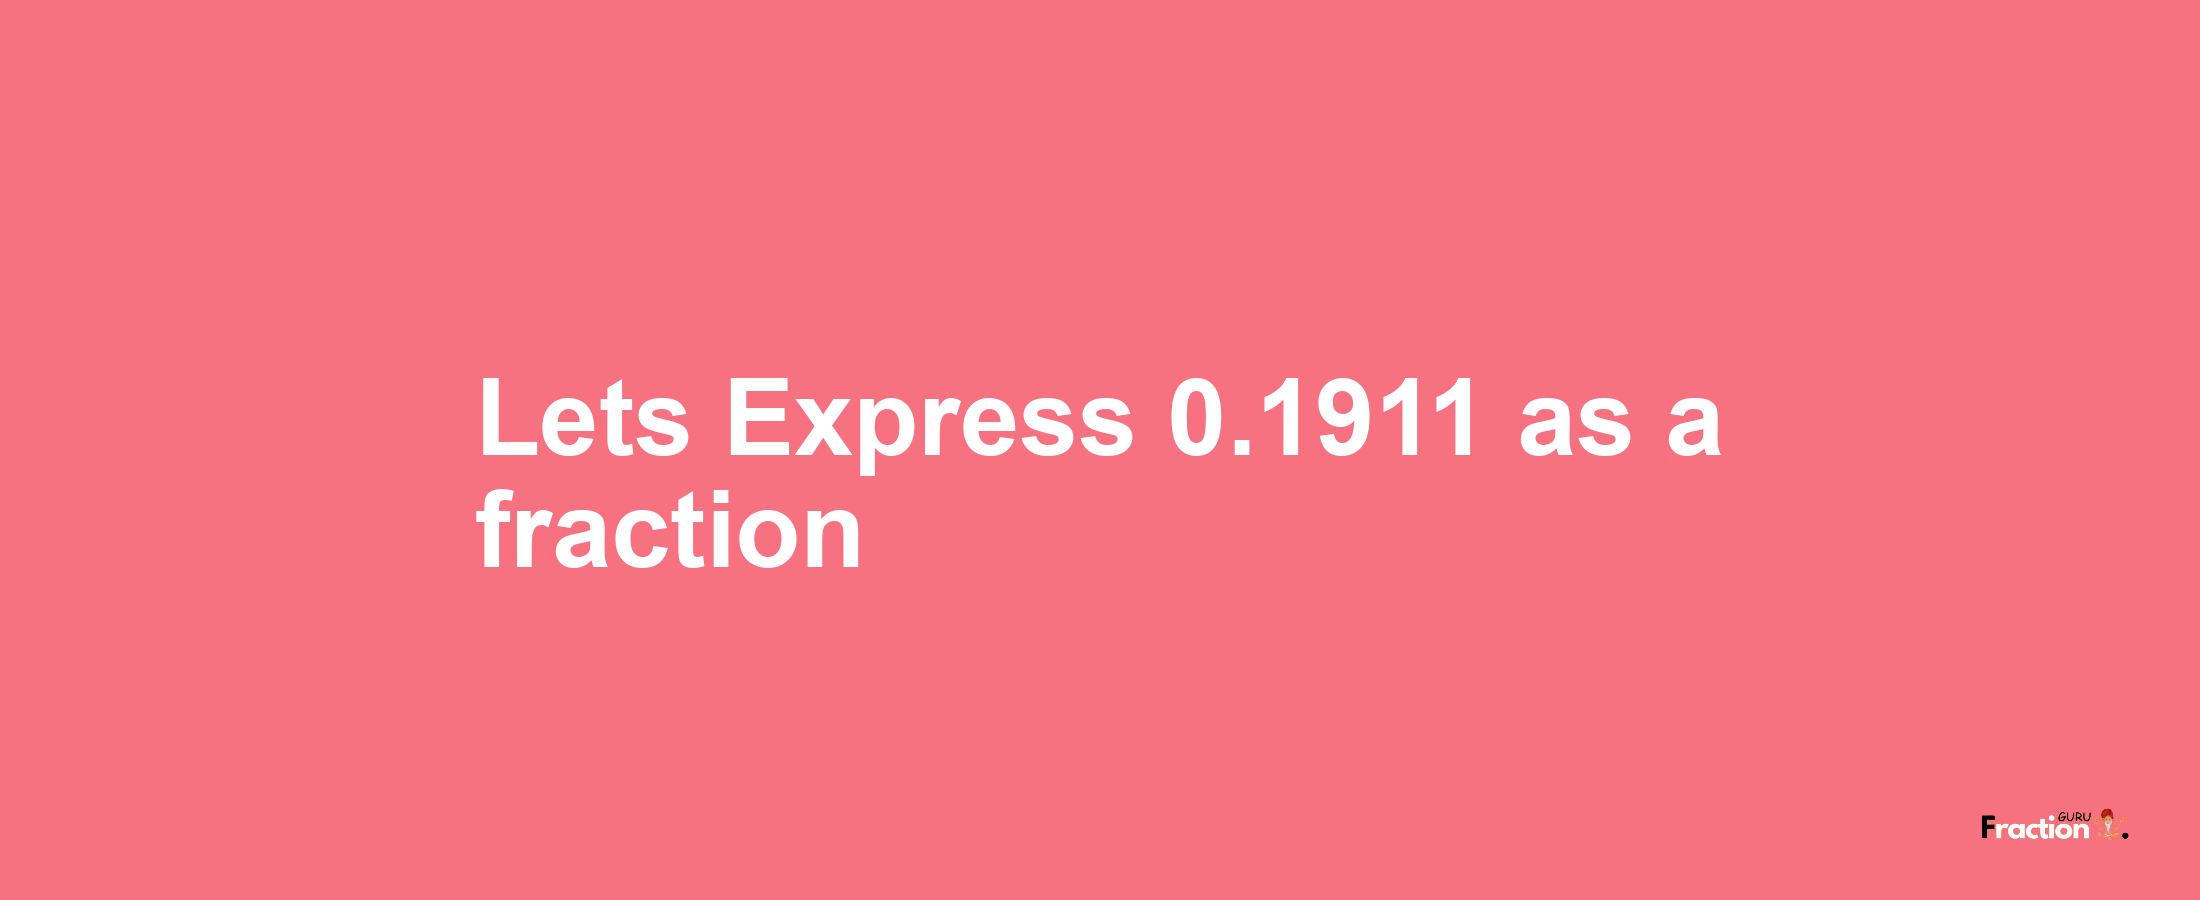 Lets Express 0.1911 as afraction